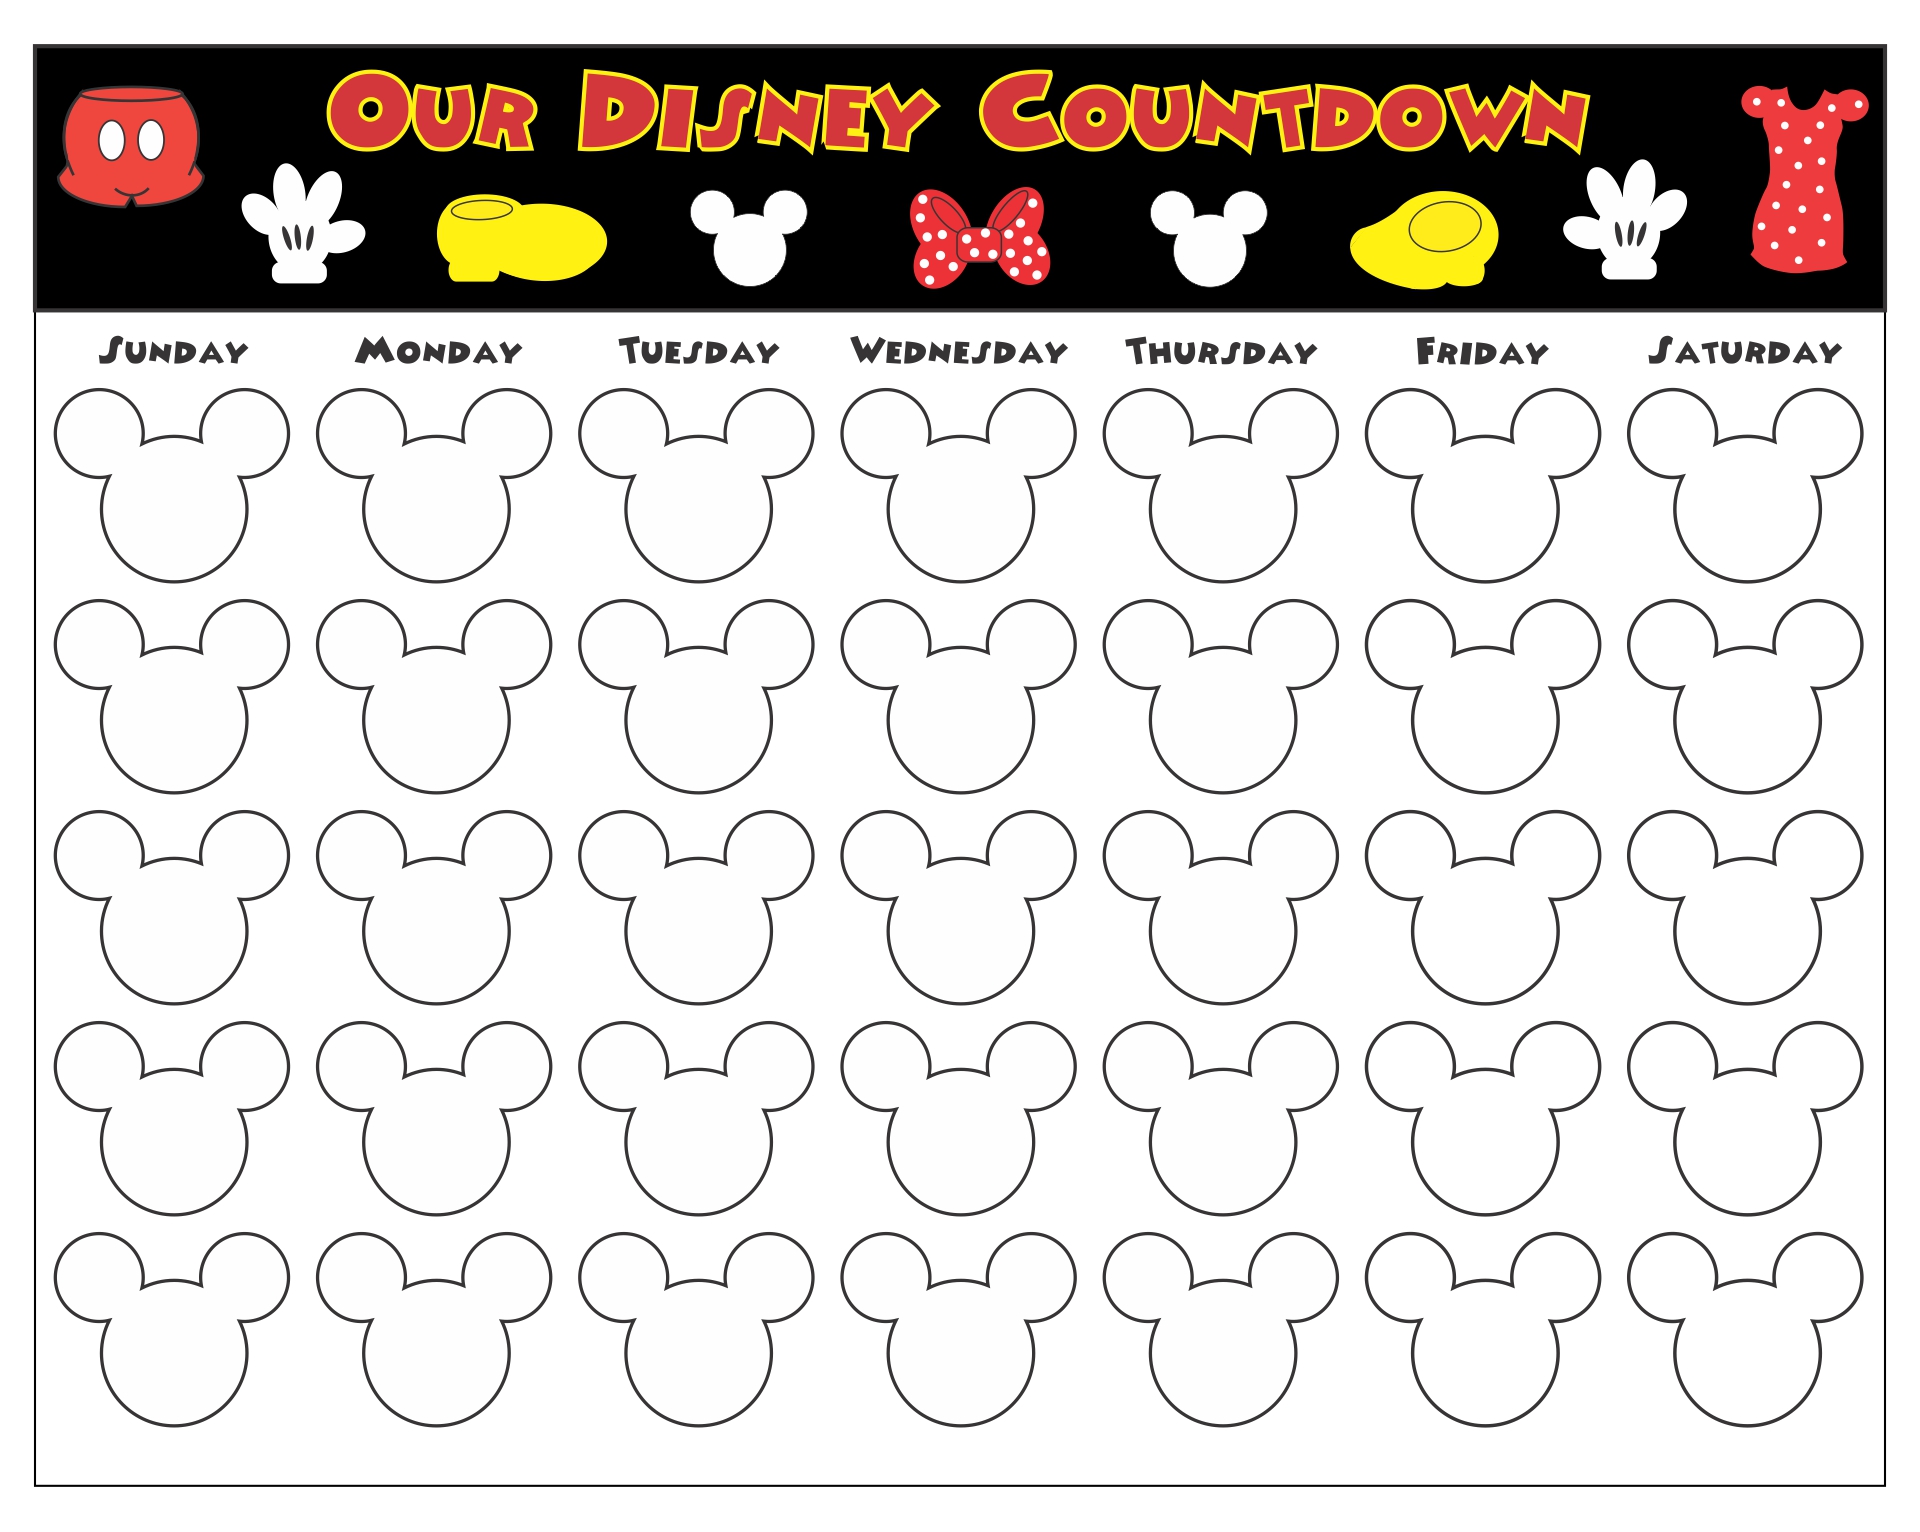 Disney 30 Day Countdown Planner Stickers Perfect for any planner